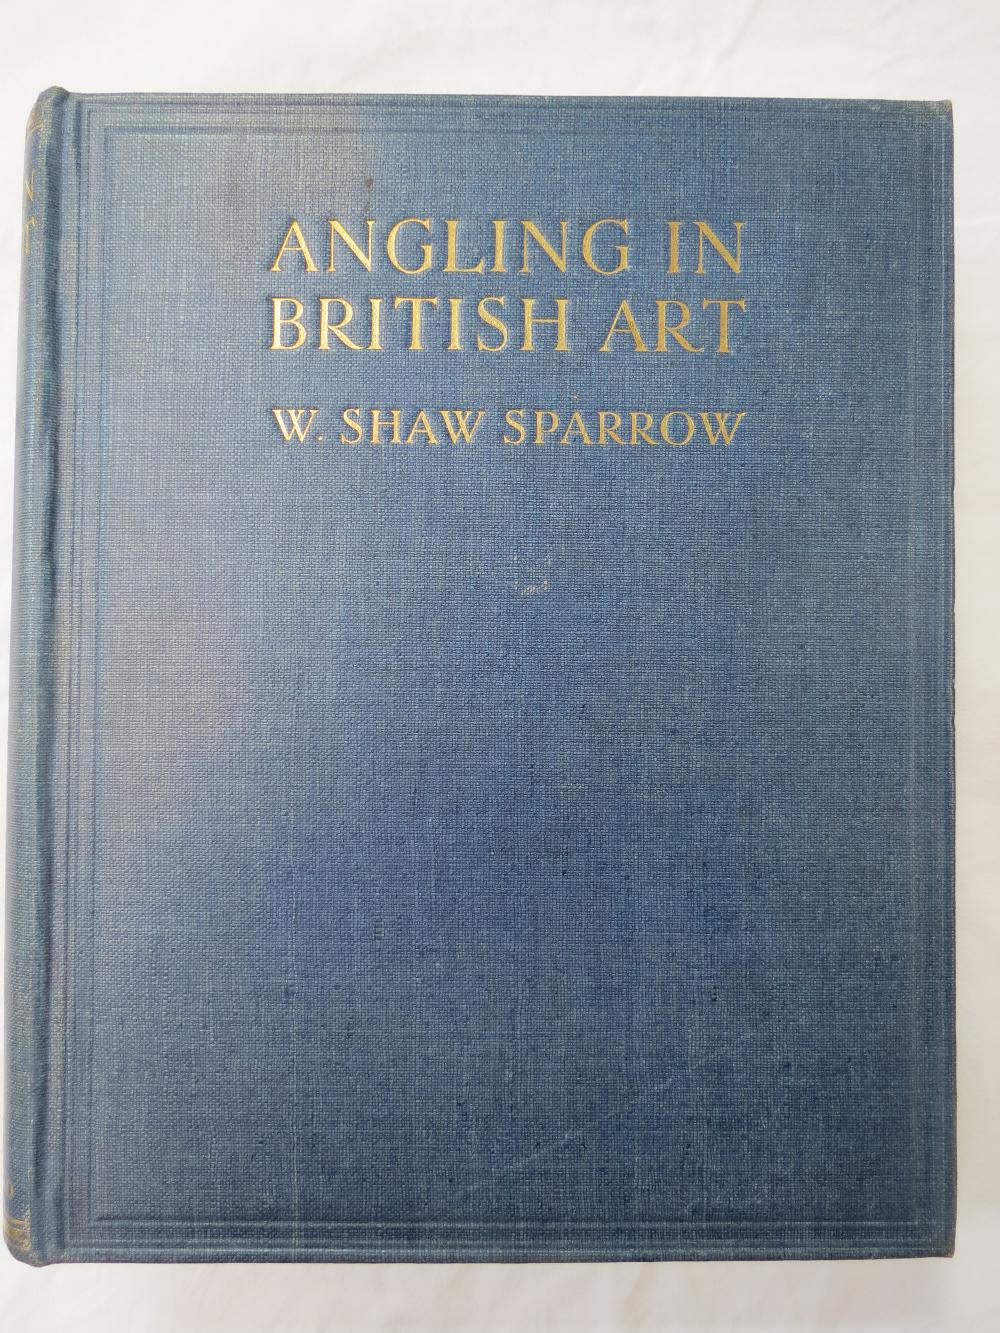 Book: Angling in British Art through five centuries by Walter Shaw Sparrow, John Lane The Bodley